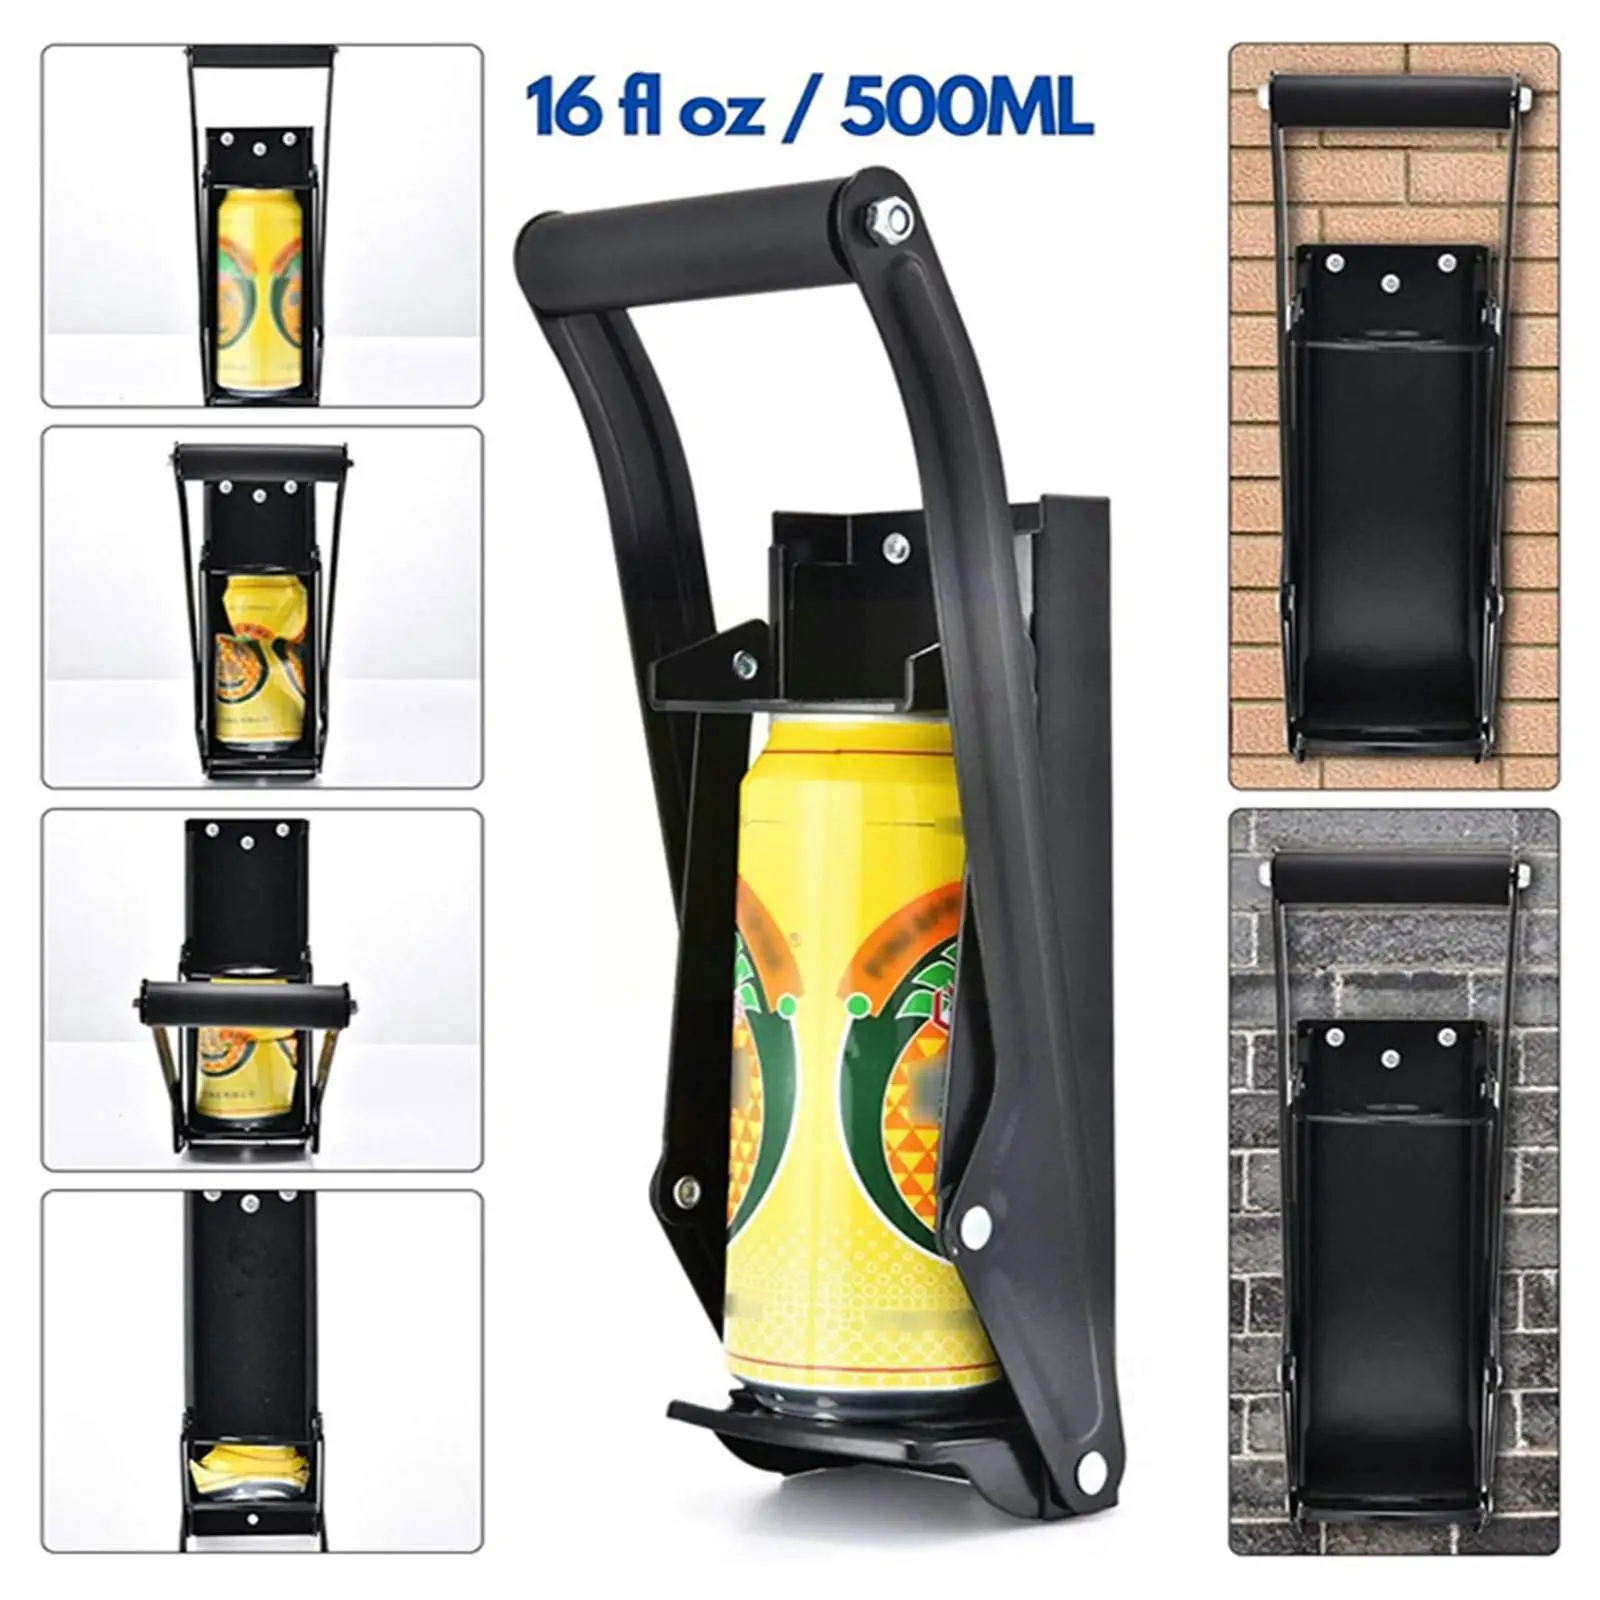 

Aluminum Can Crusher Bottle Opener Kitchen Supplies For Soda Beer Cans Heavy Duty Metal Wall Mounted Eco-friendly Recycling I3l2